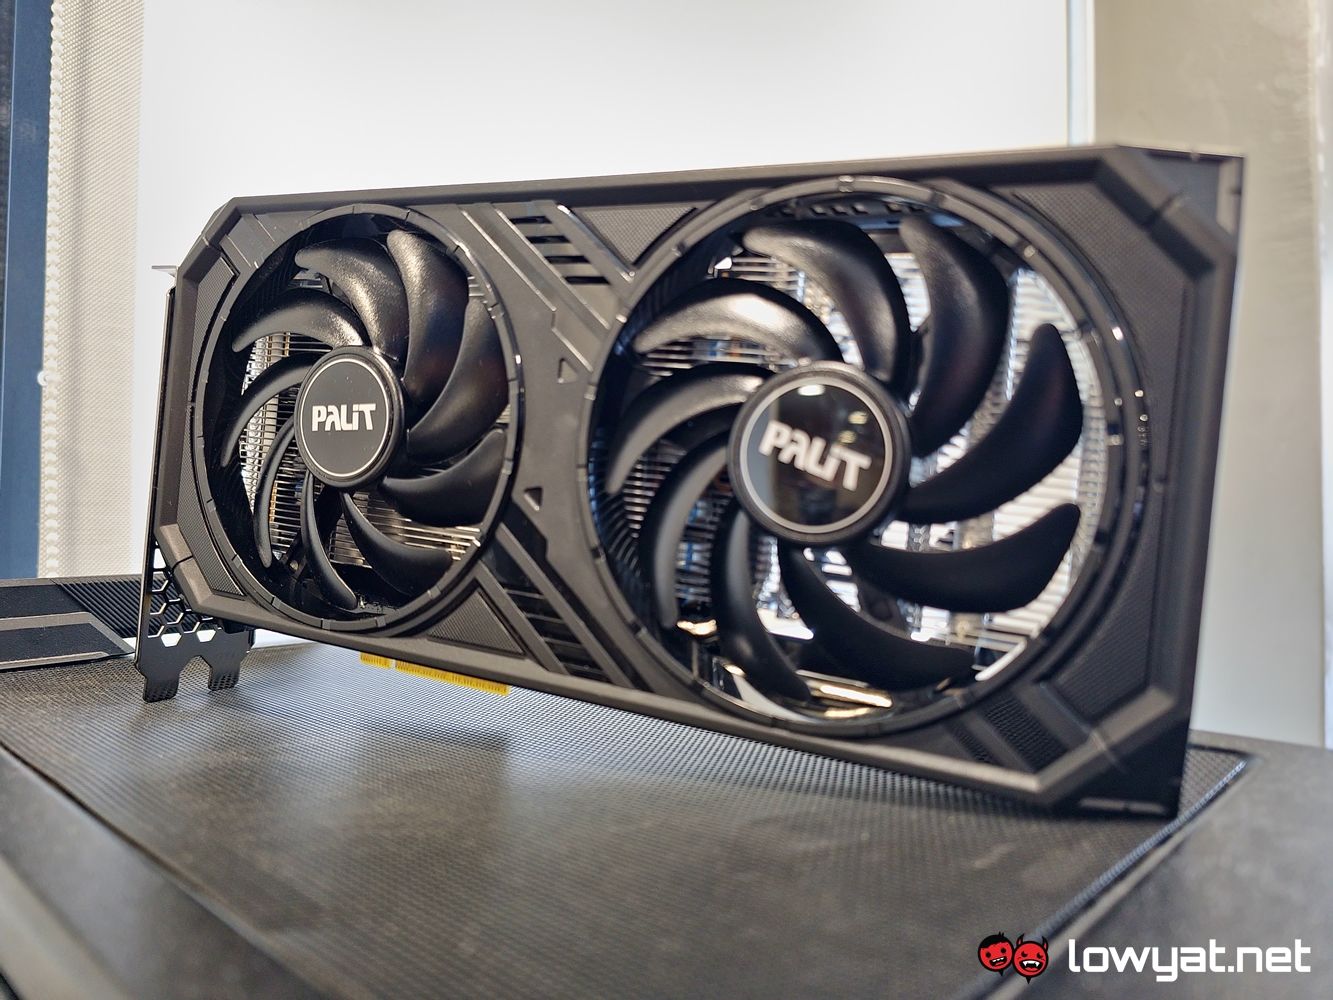 GeForce RTX 4060 Ti and 4060, Starting at $299, Are on Their Way - CNET